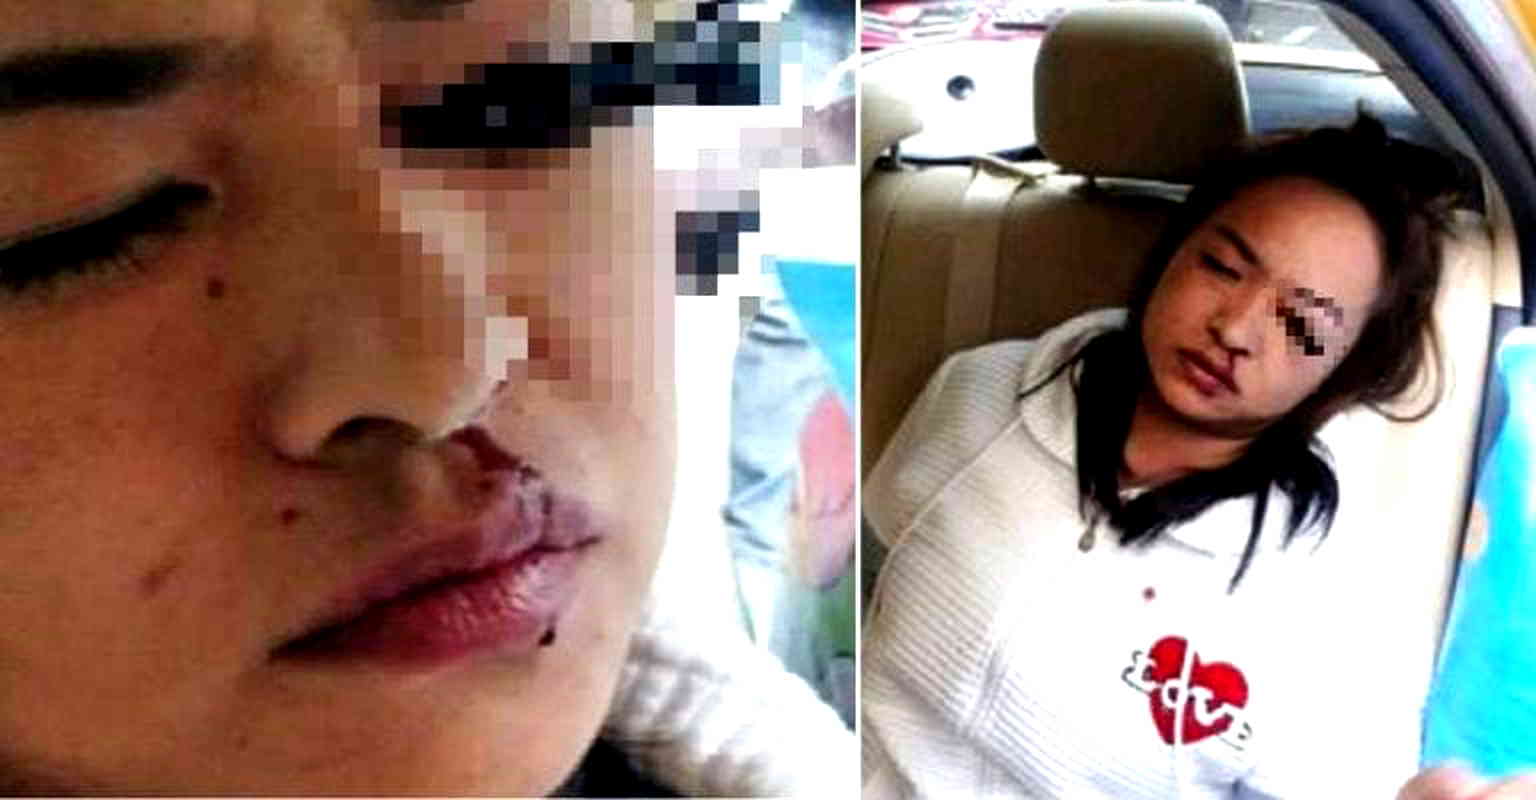 Thai Woman’s Freak Accident is Why You Should Never Apply Makeup in a Moving Car